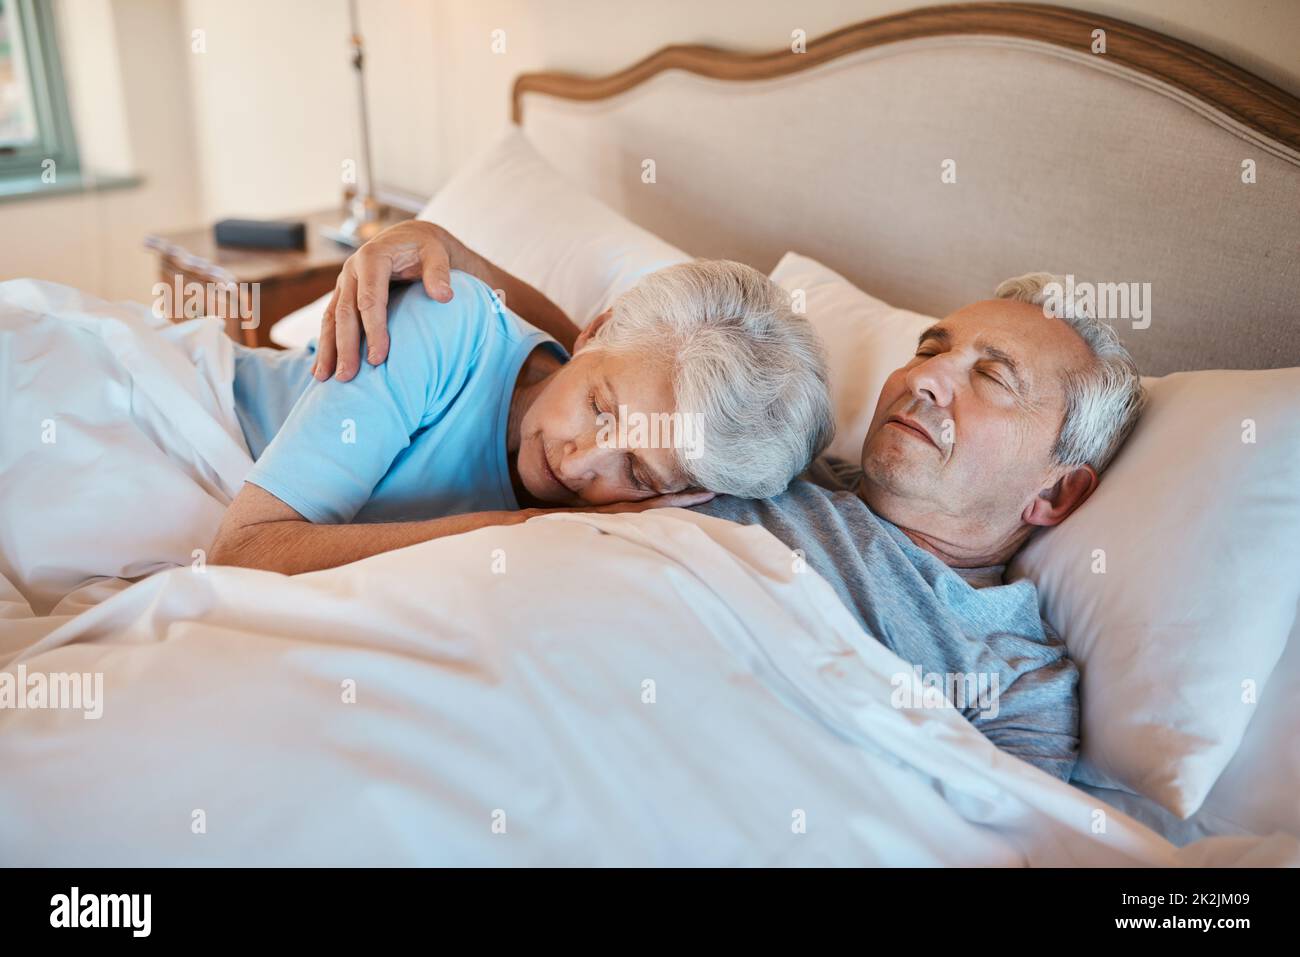 Ive listened to this heartbeat for years. Cropped shot of an affectionate senior couple cuddling each other while asleep in bed at a nursing home. Stock Photo